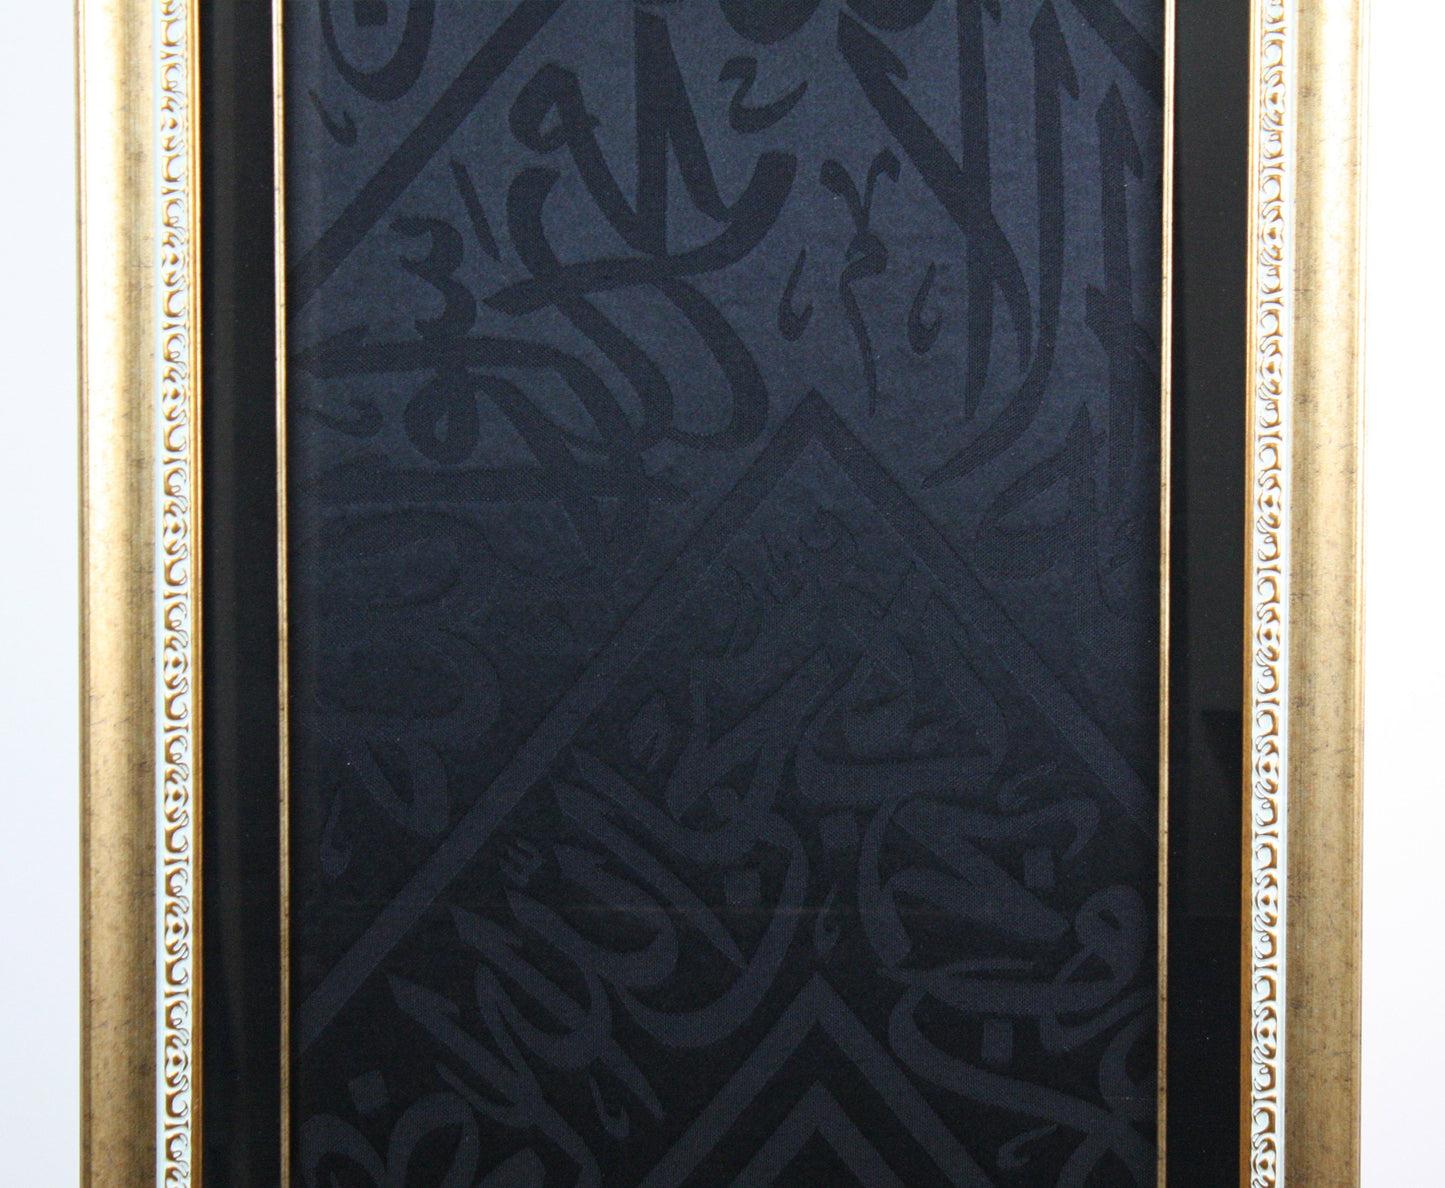 Islamic Blessed Black Cloth of Holy Kaaba / Authentic Ottoman Ornate Frame /  Precious Unique Gift For Muslim Father and Mother